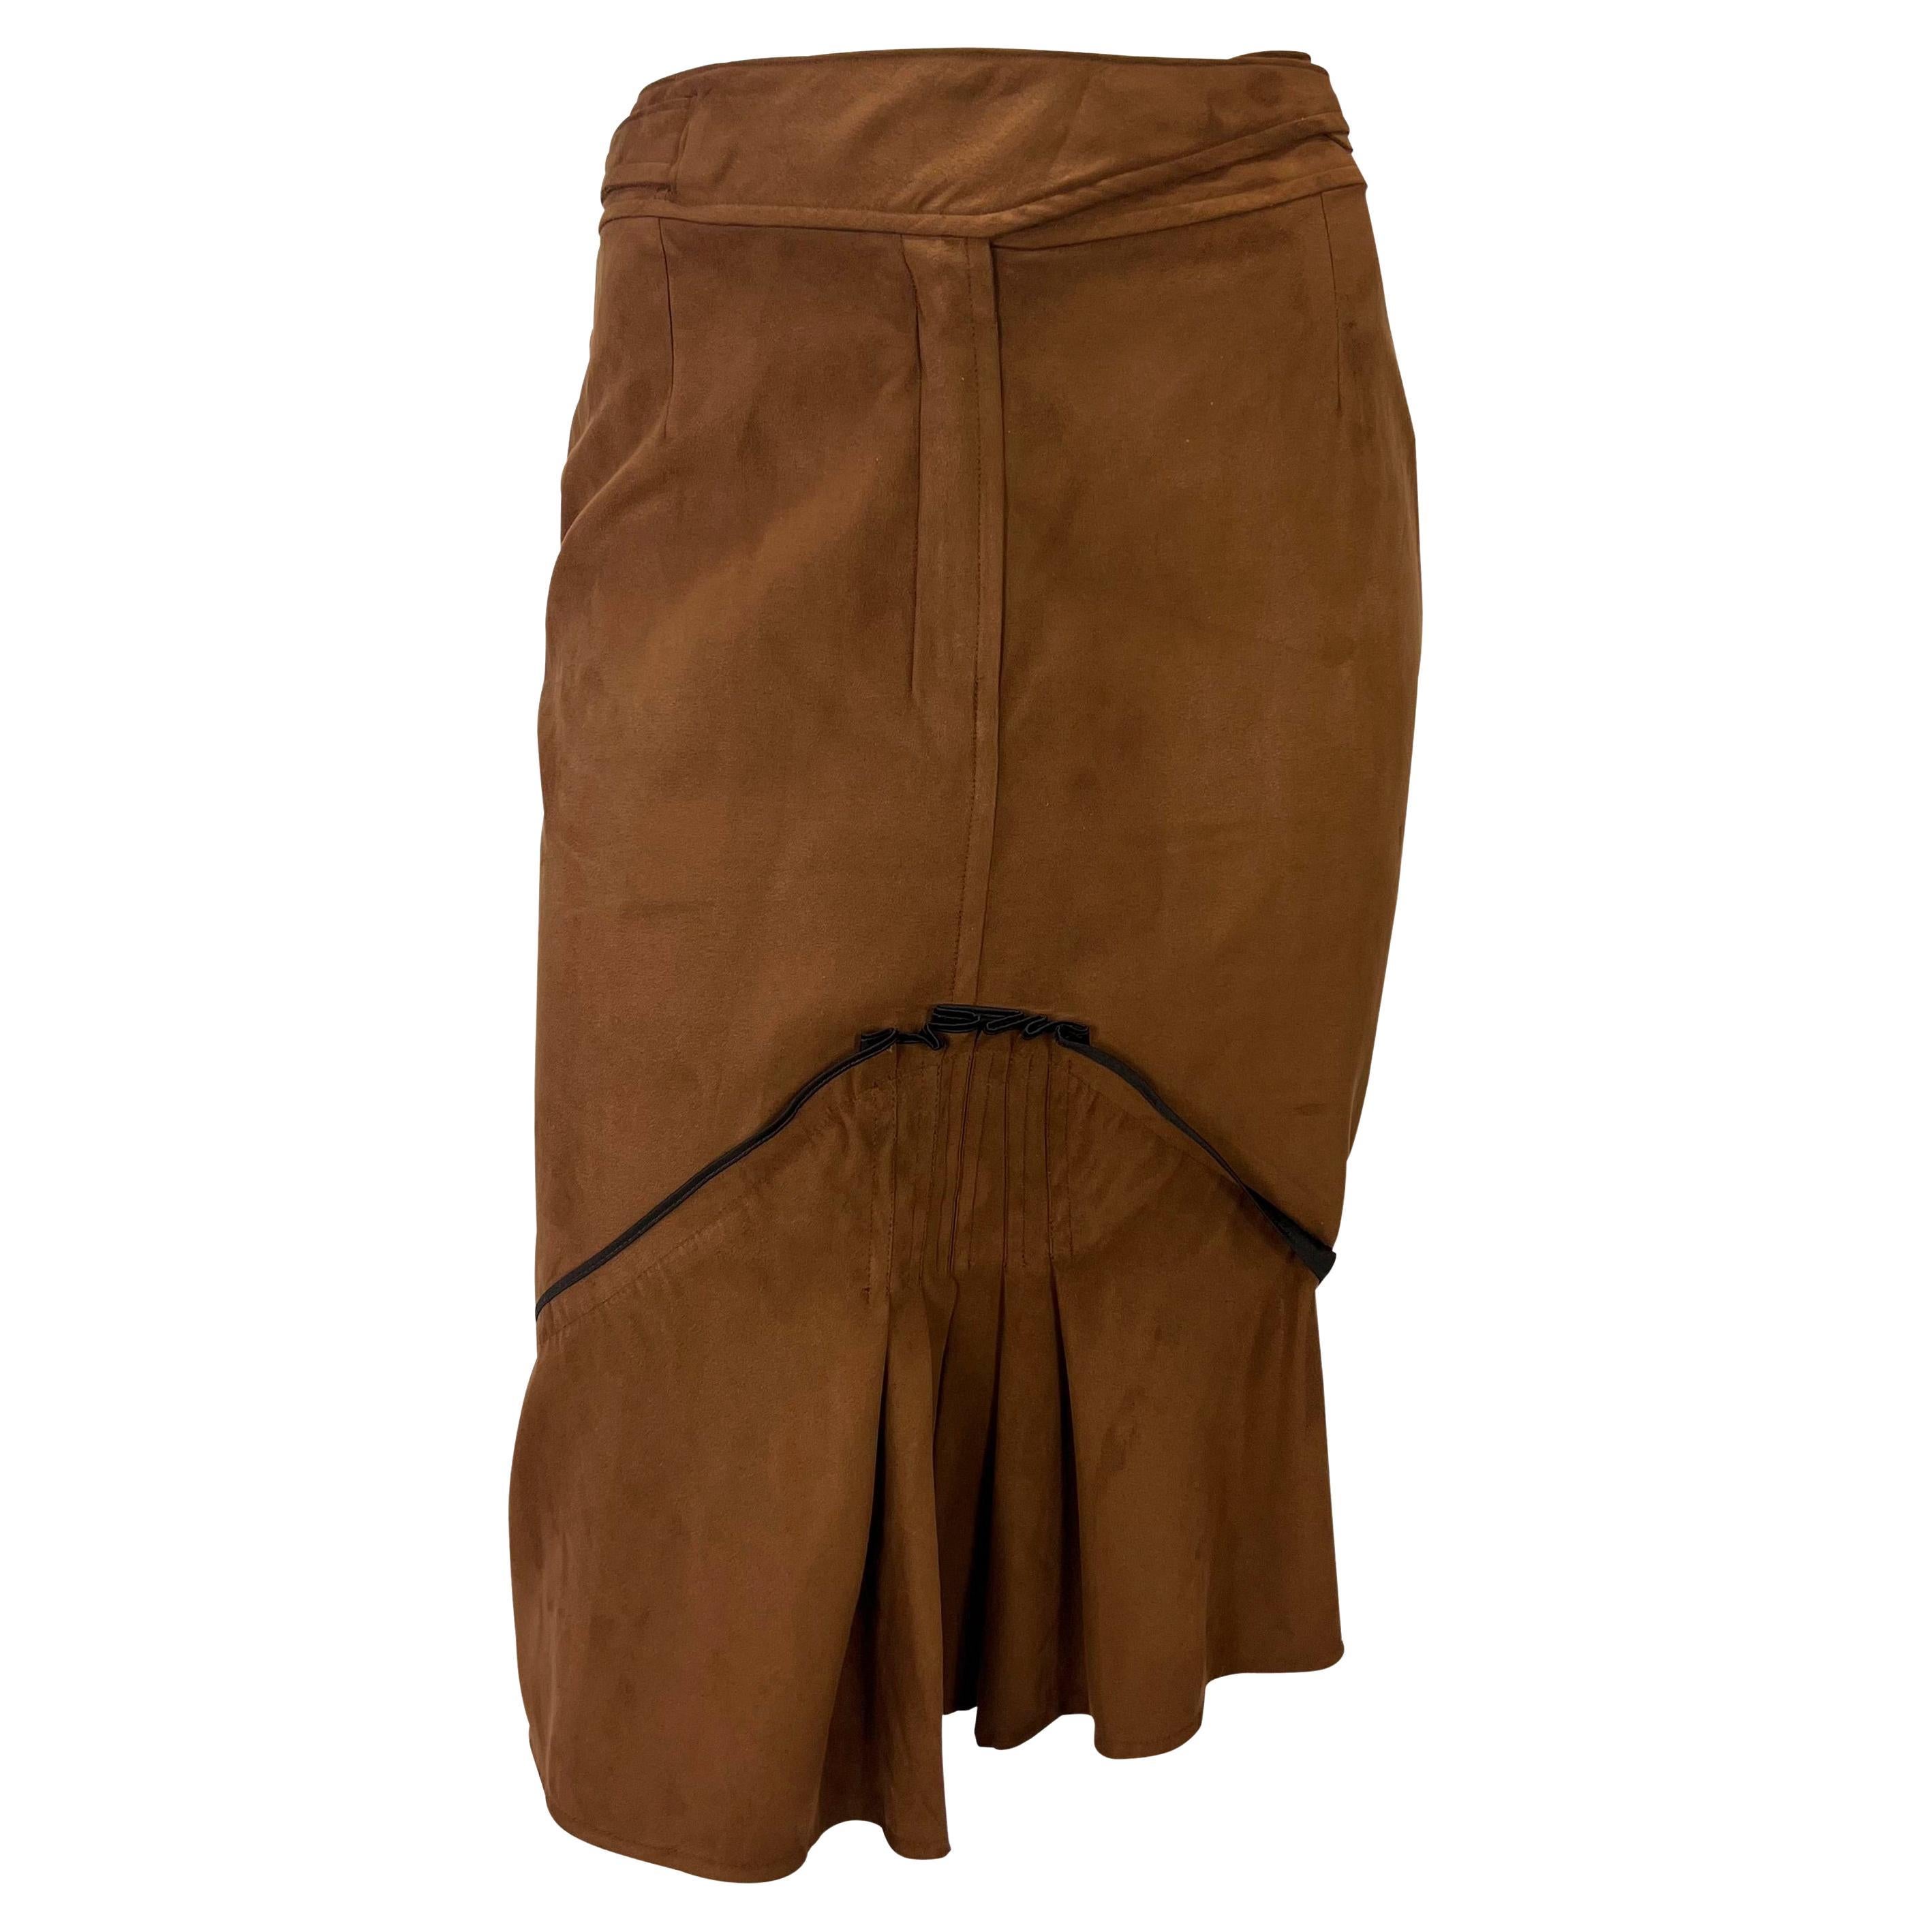 S/S 2003 Yves Saint Laurent by Tom Ford Brown Belted Ruffle Vegan Suede Skirt